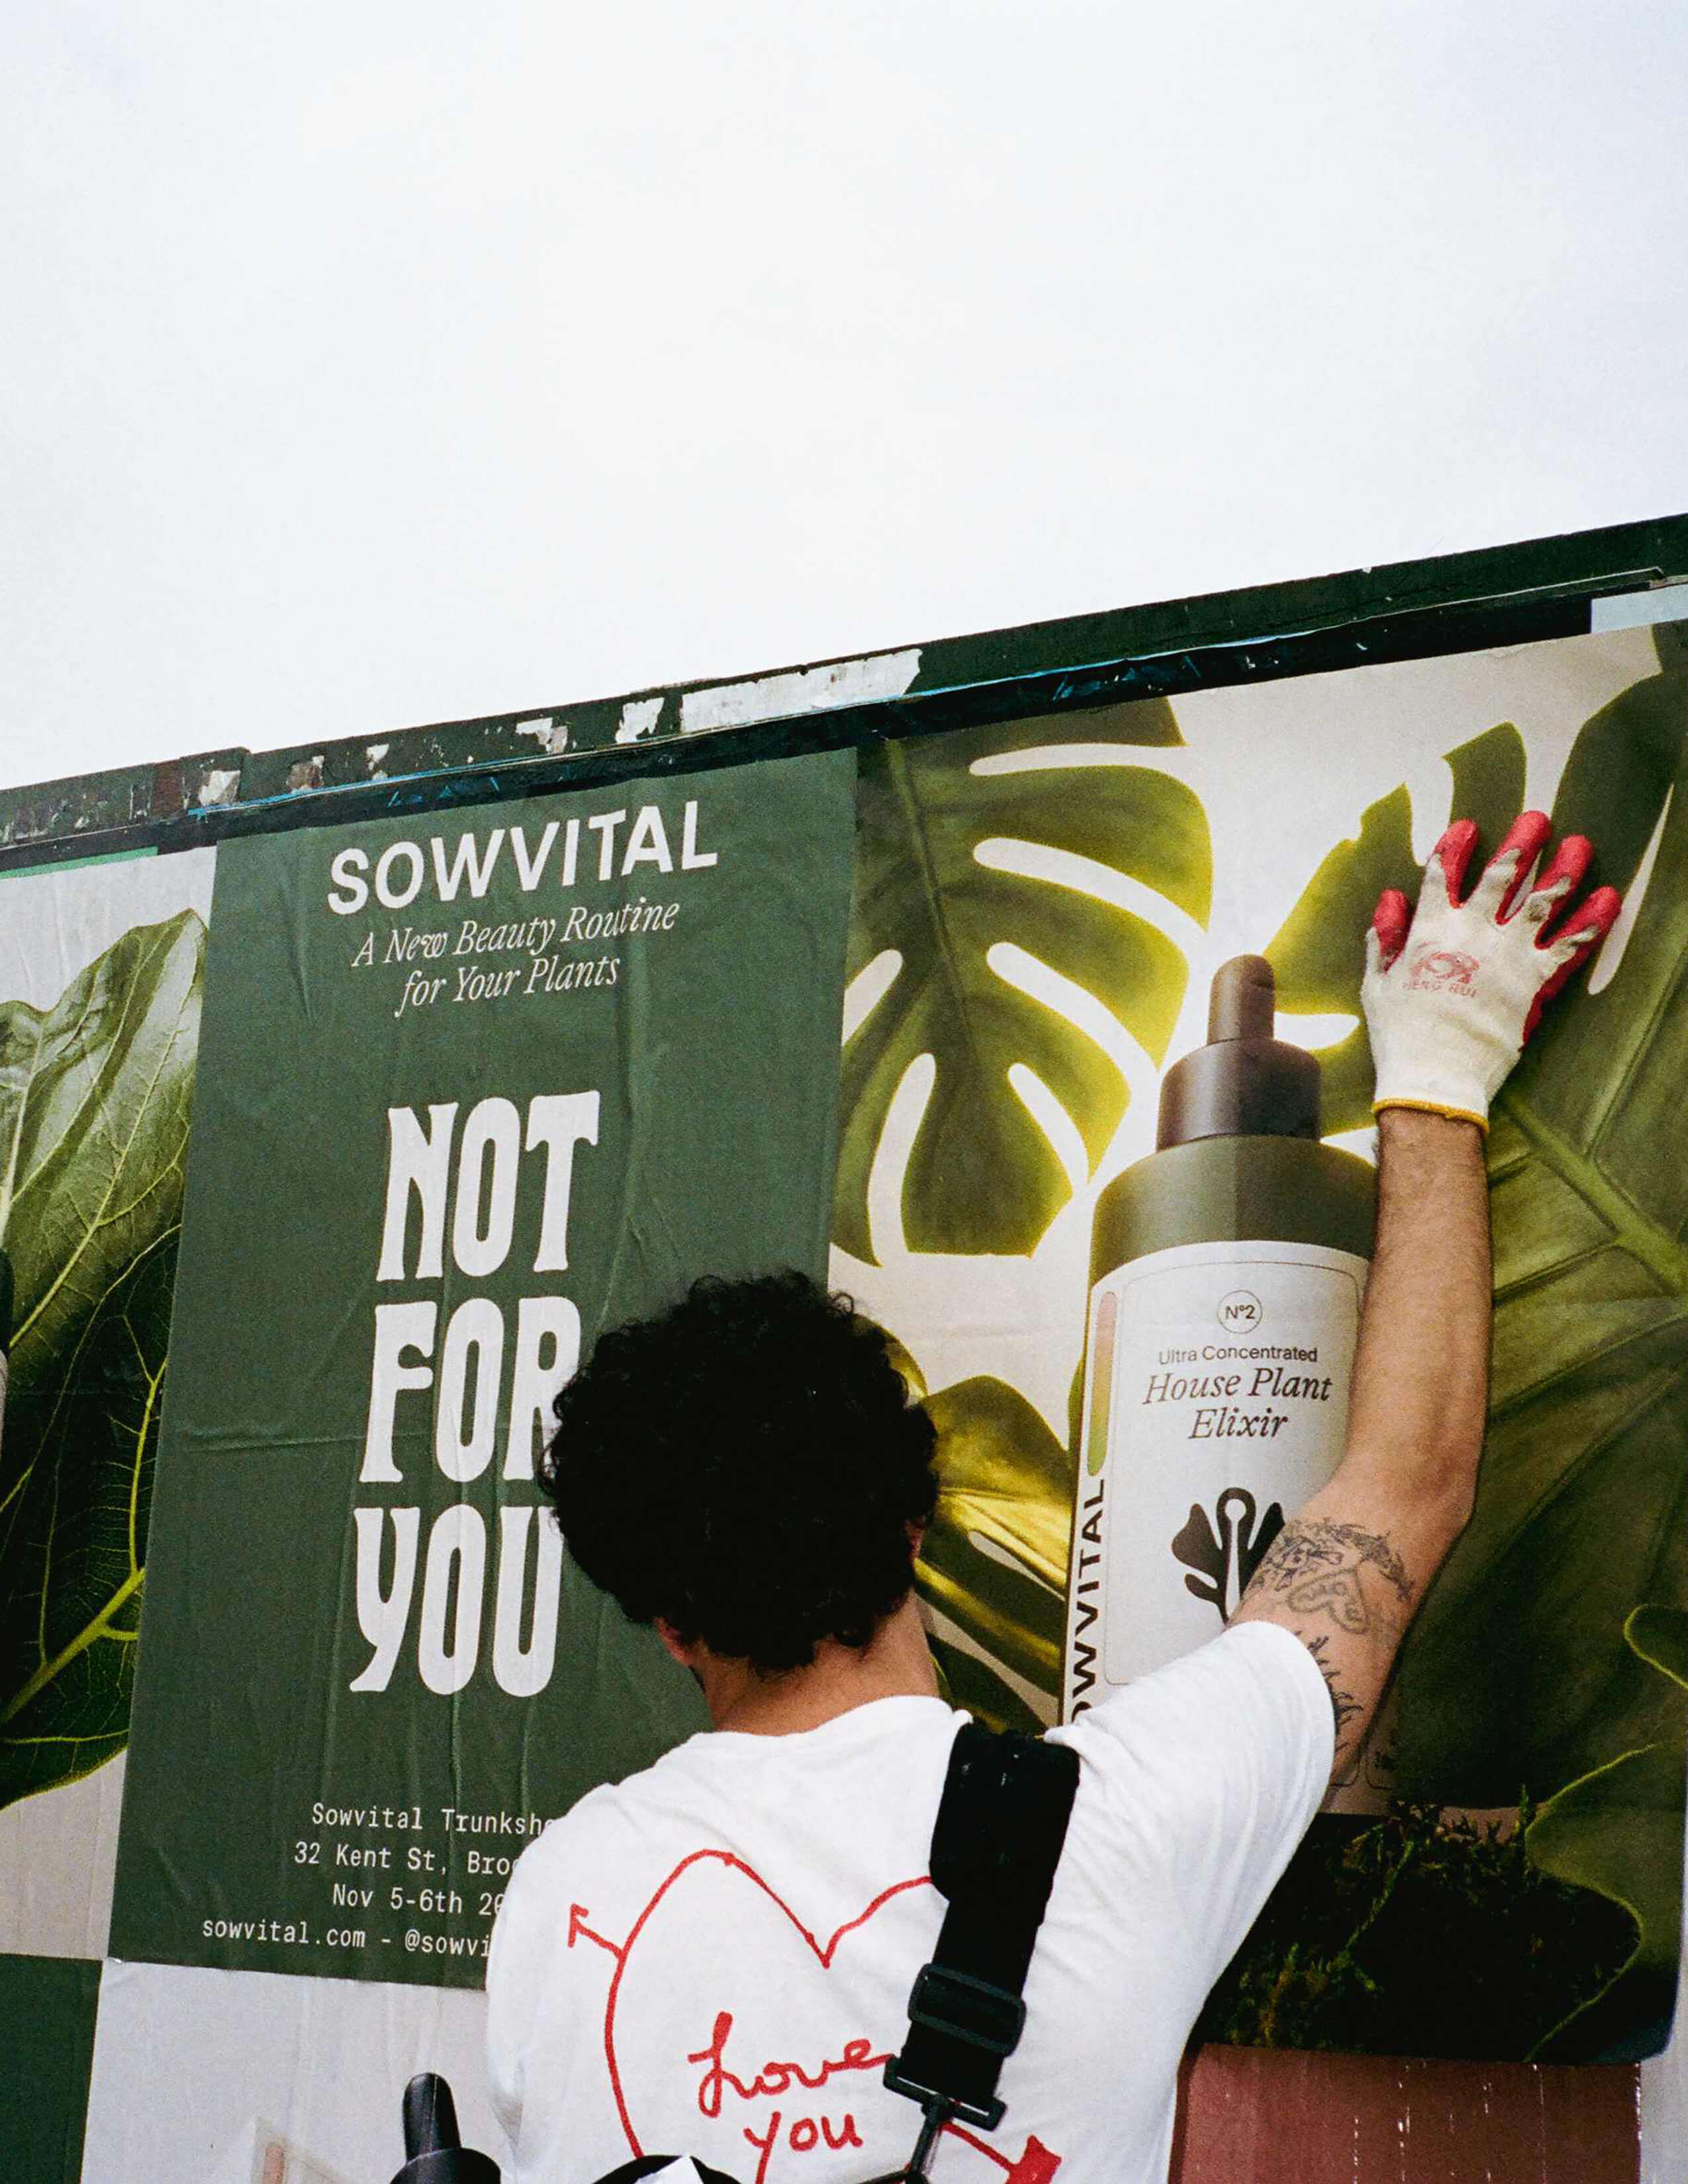 A man was working on sticking the Sowvital poster on the boards.